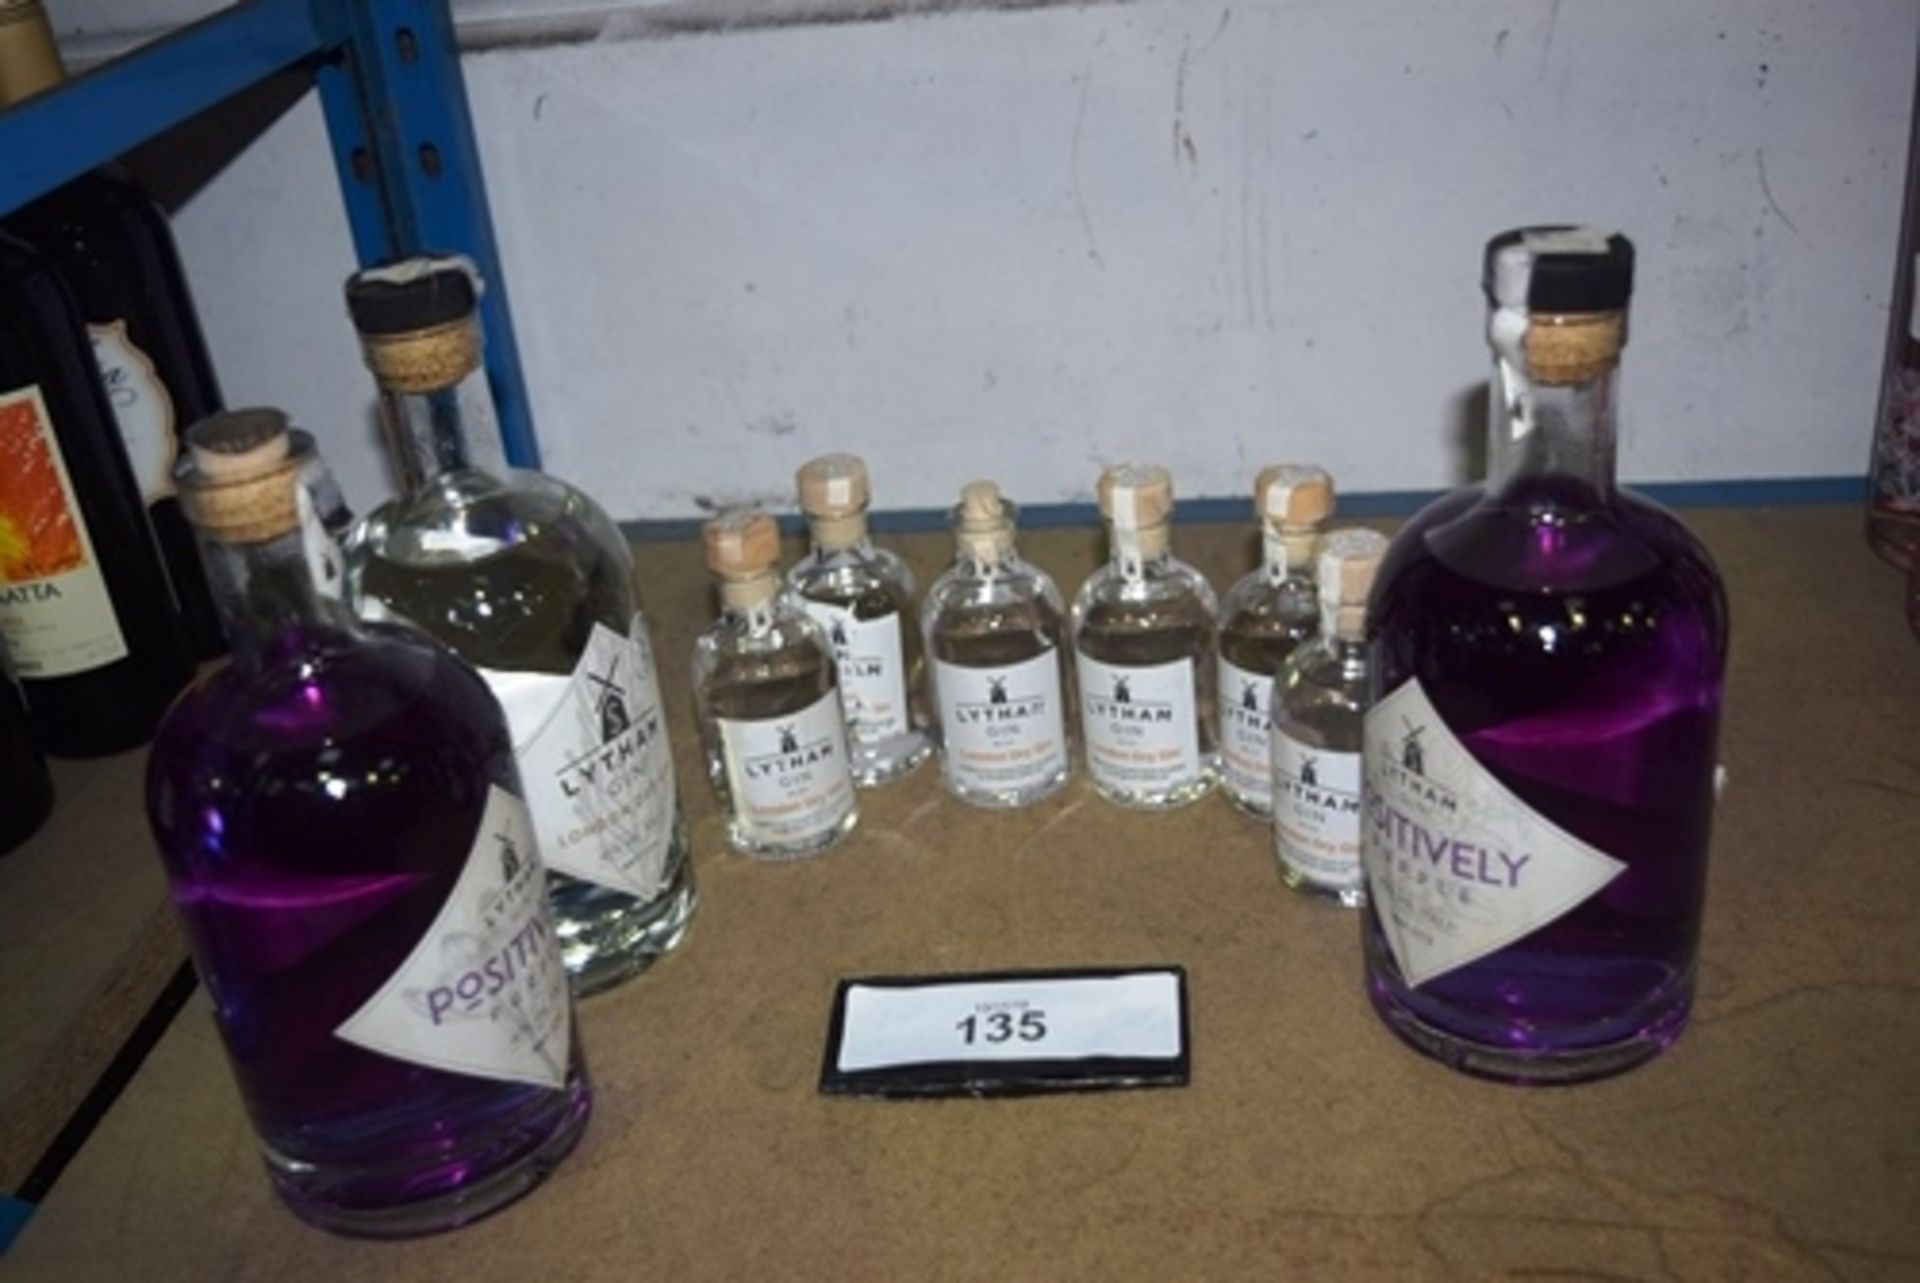 2 x 70cl bottles of Lytham Positively Purple Gin, 1 x 70cl bottle of Lytham London Dry Gin and 6 x